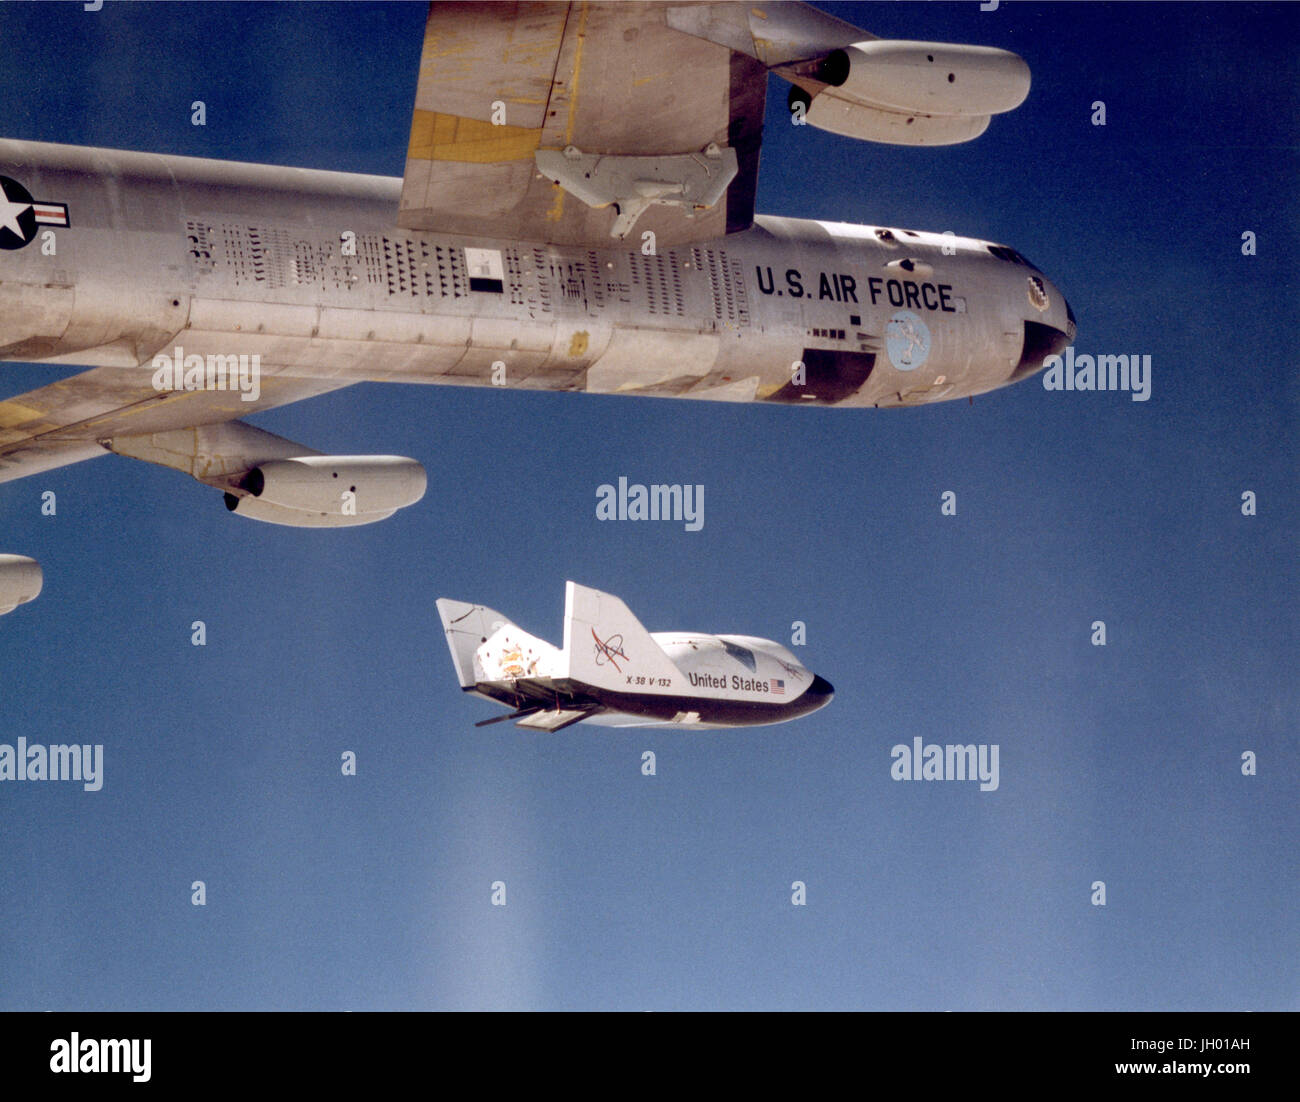 The X-38 research vehicle drops away from NASA's B-52 mothership immediately after being released from the B-52's wing pylon. More than 30 years earlier, this same B-52 launched the original lifting-body vehicles flight tested by NASA and the Air Force at what is now called the Dryden Flight Research Center and the Air Force Flight Test Center. NASA B-52 Tail Number 008 is an air launch carrier aircraft 'mothership,' as well as a research aircraft platform that has been used on a variety of research projects. Stock Photo